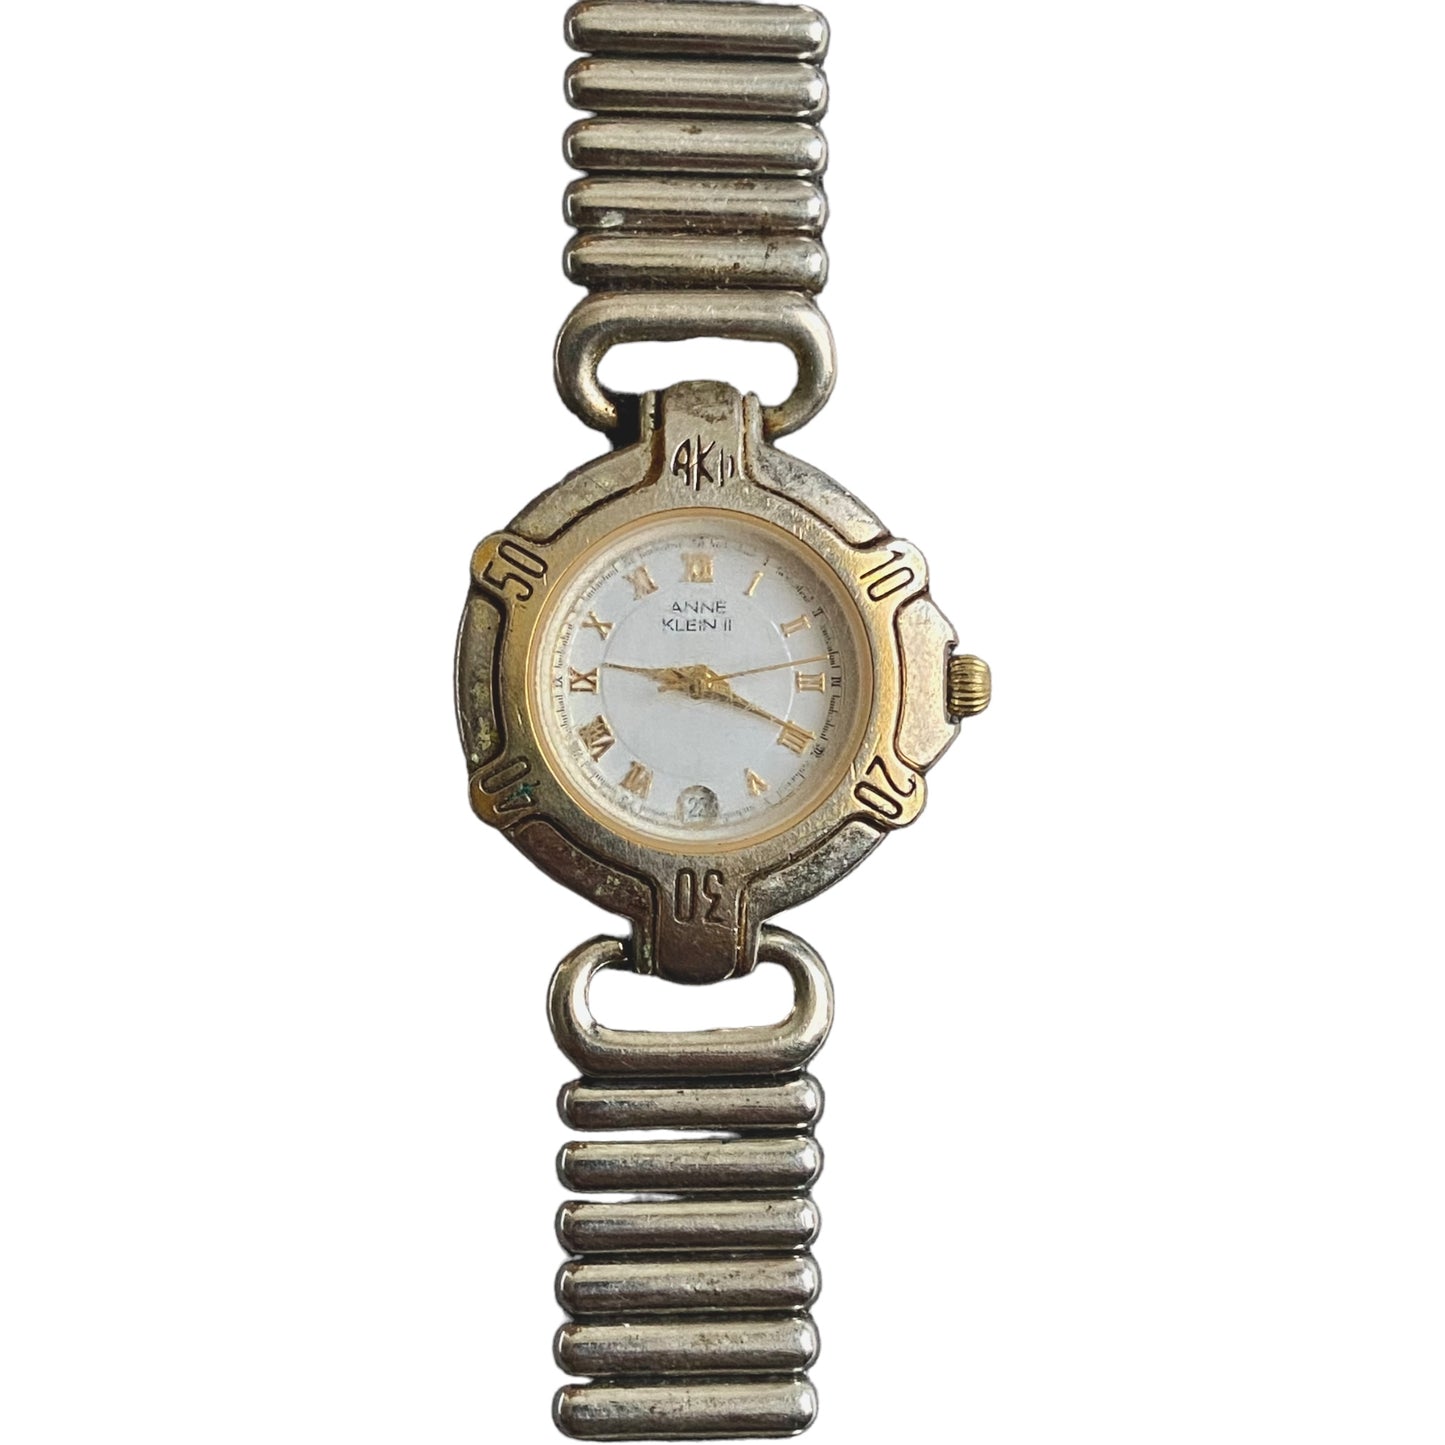 One-of-one | Anne Klein II Thailand movt. Water resistant watch